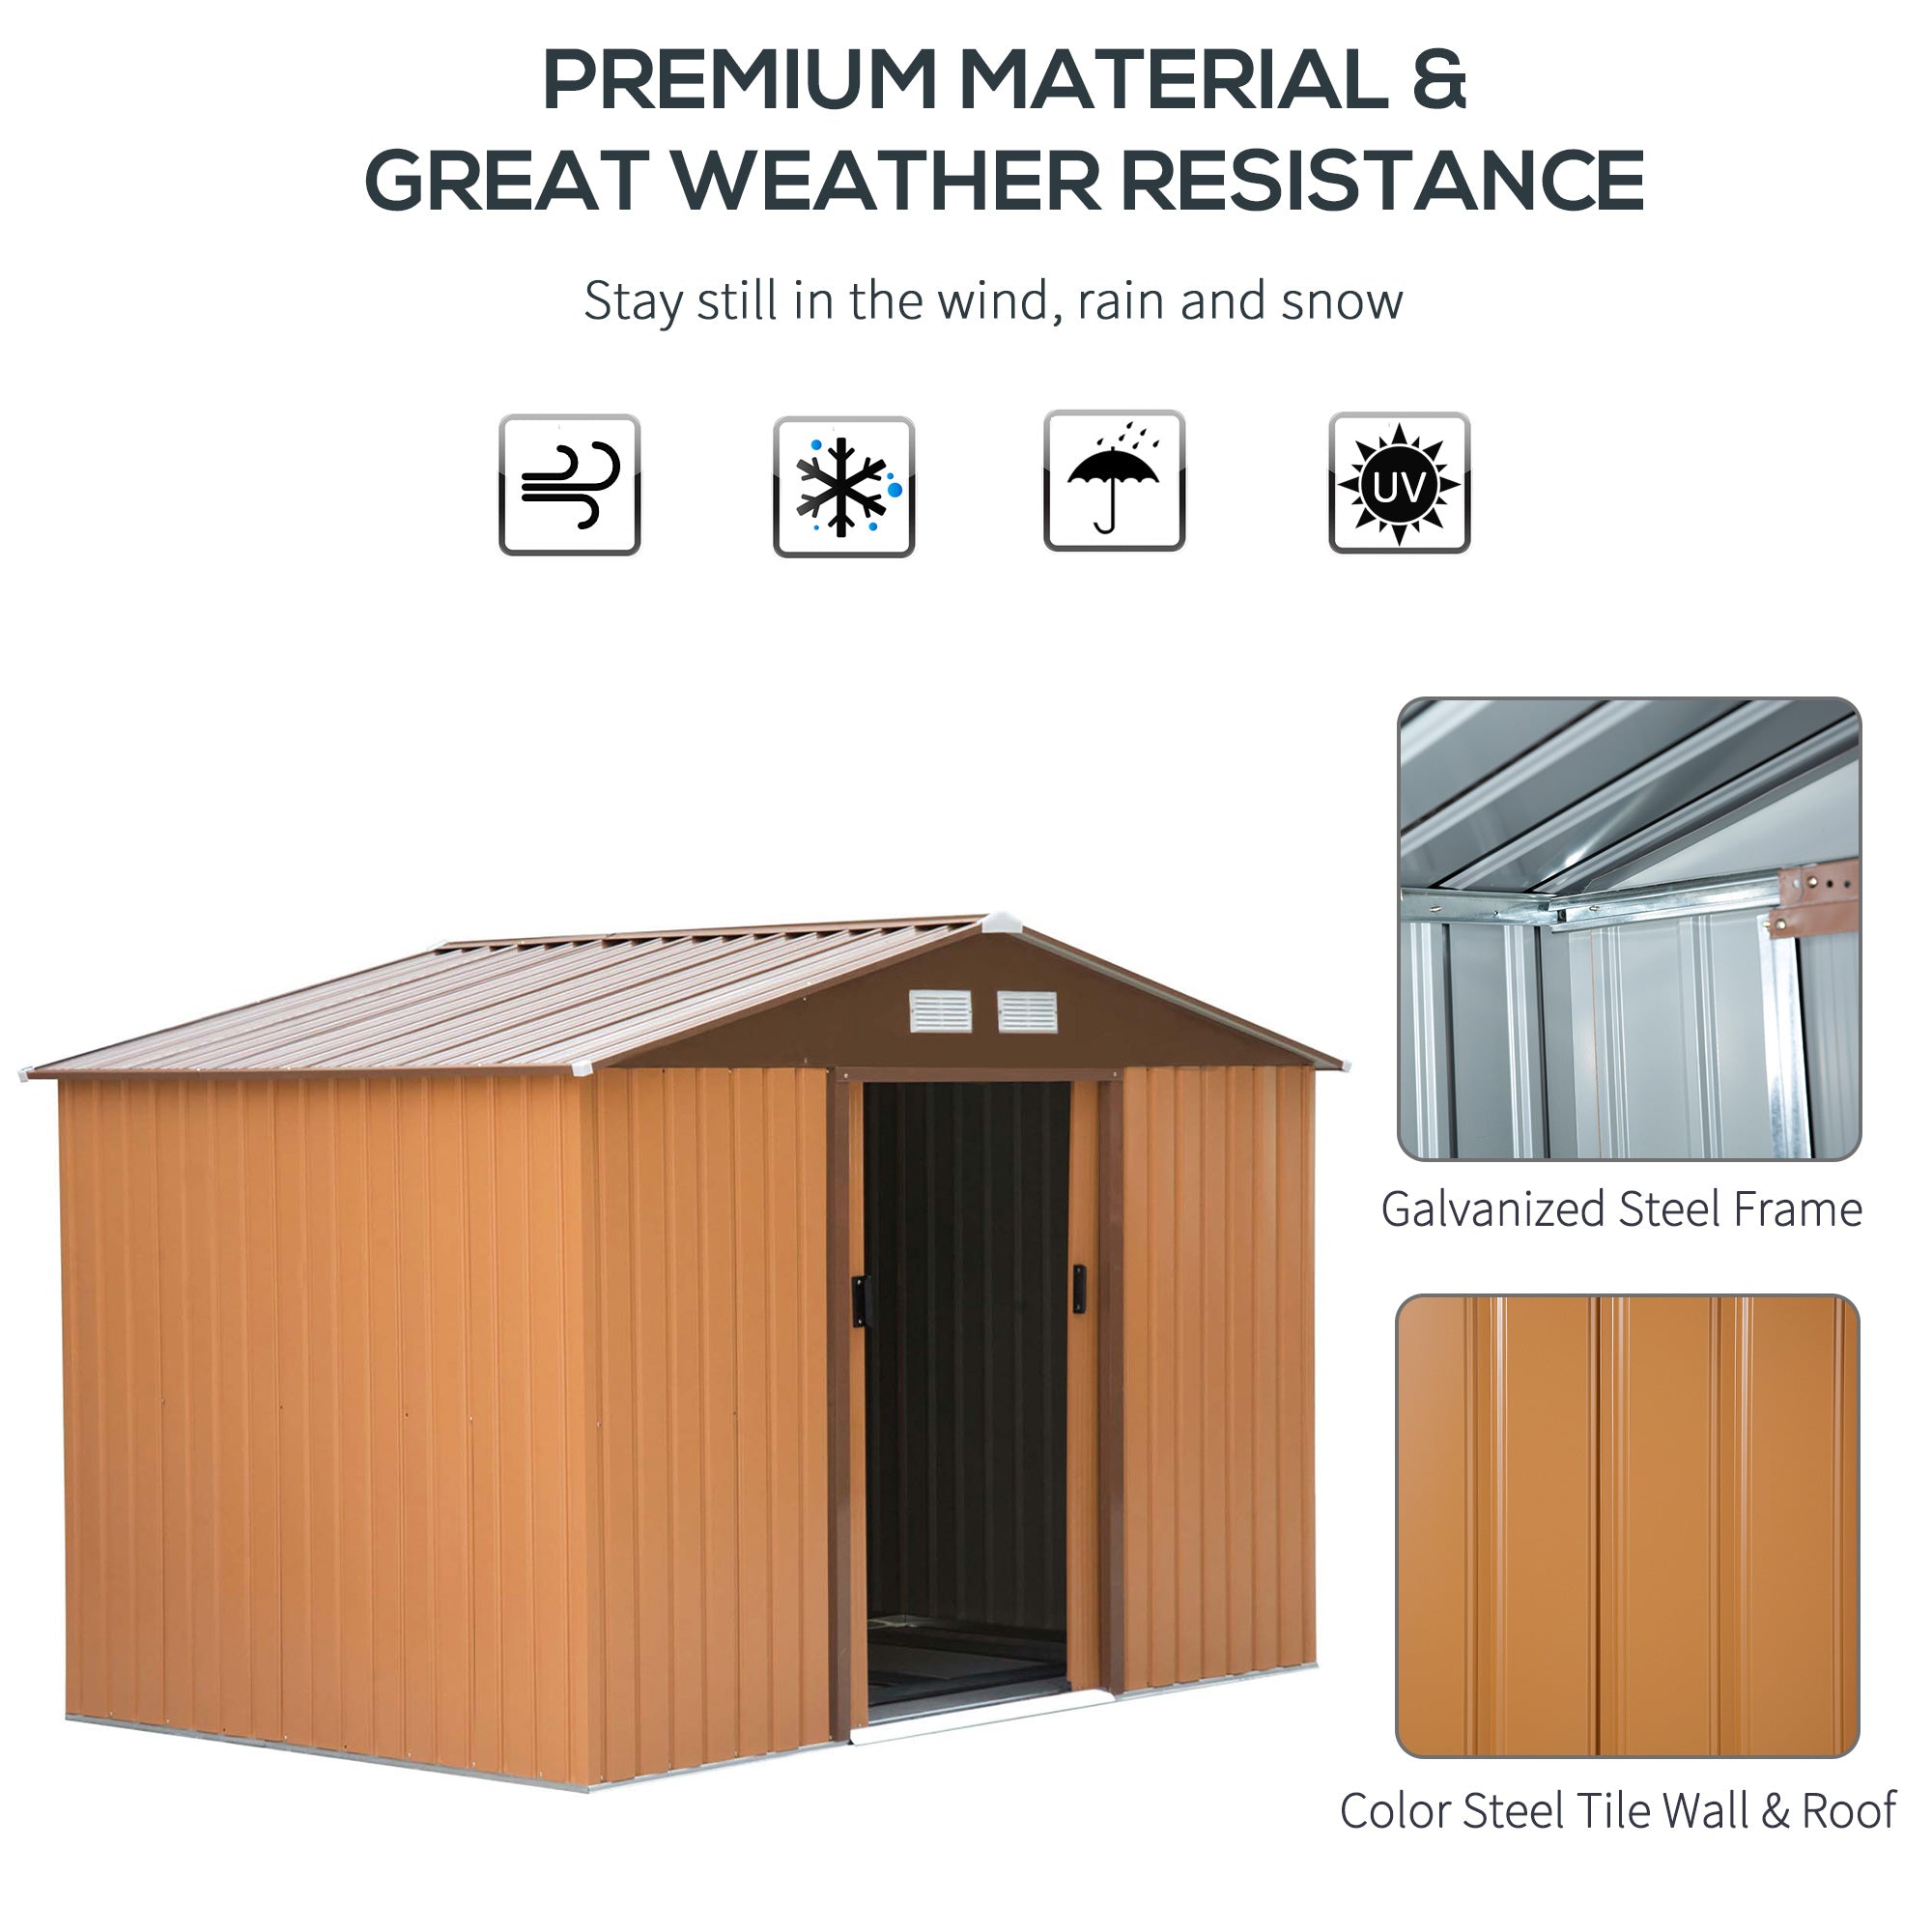 9 x 6FT Garden Metal Storage Shed Outdoor Storage Shed with Foundation Ventilation & Doors, Yellow-4